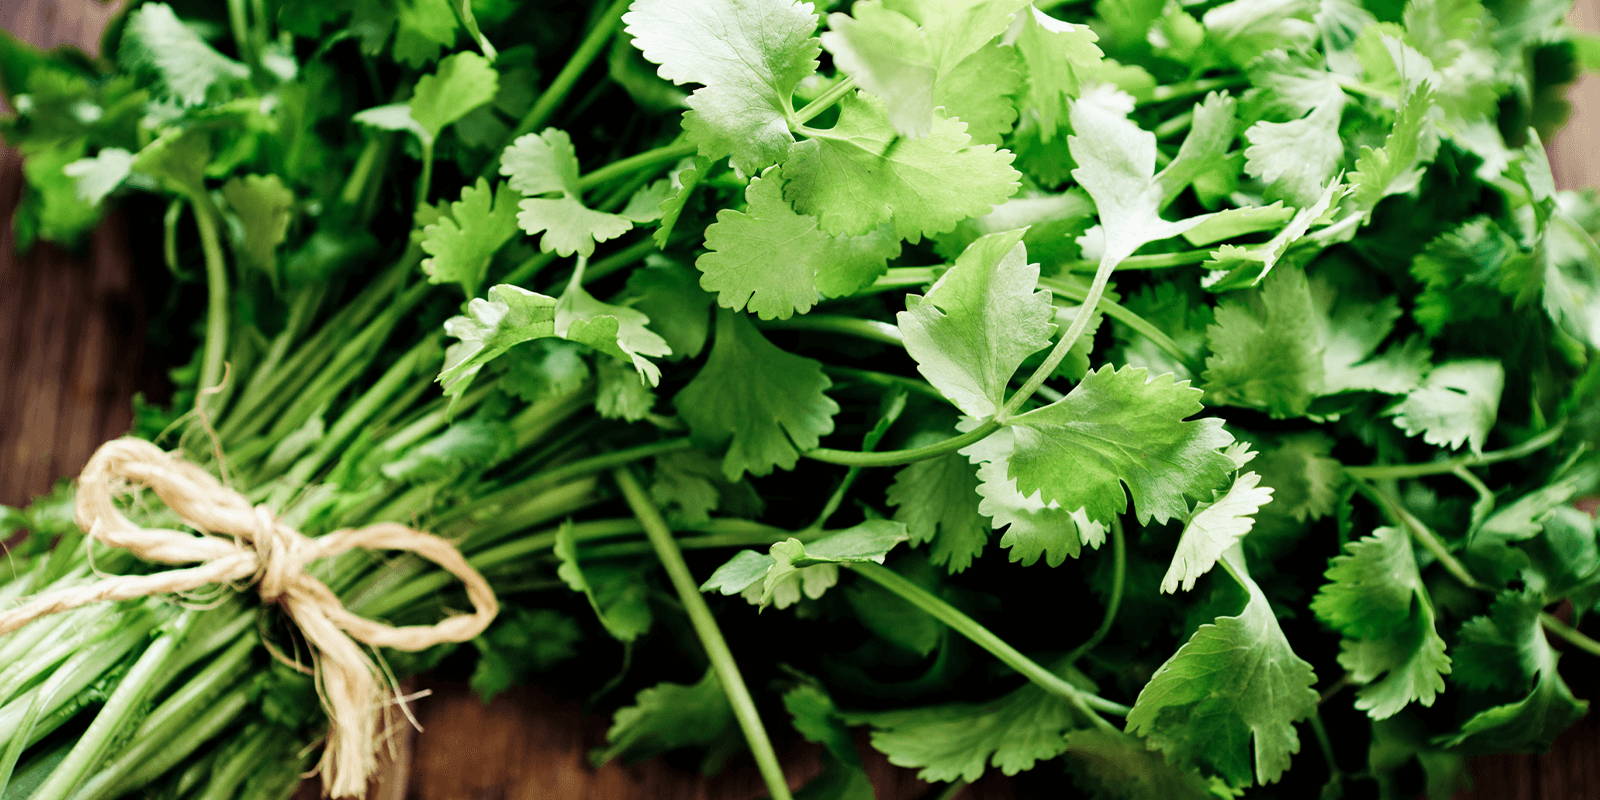 A bundle of cilantro tied with twine and placed on a wooden table.